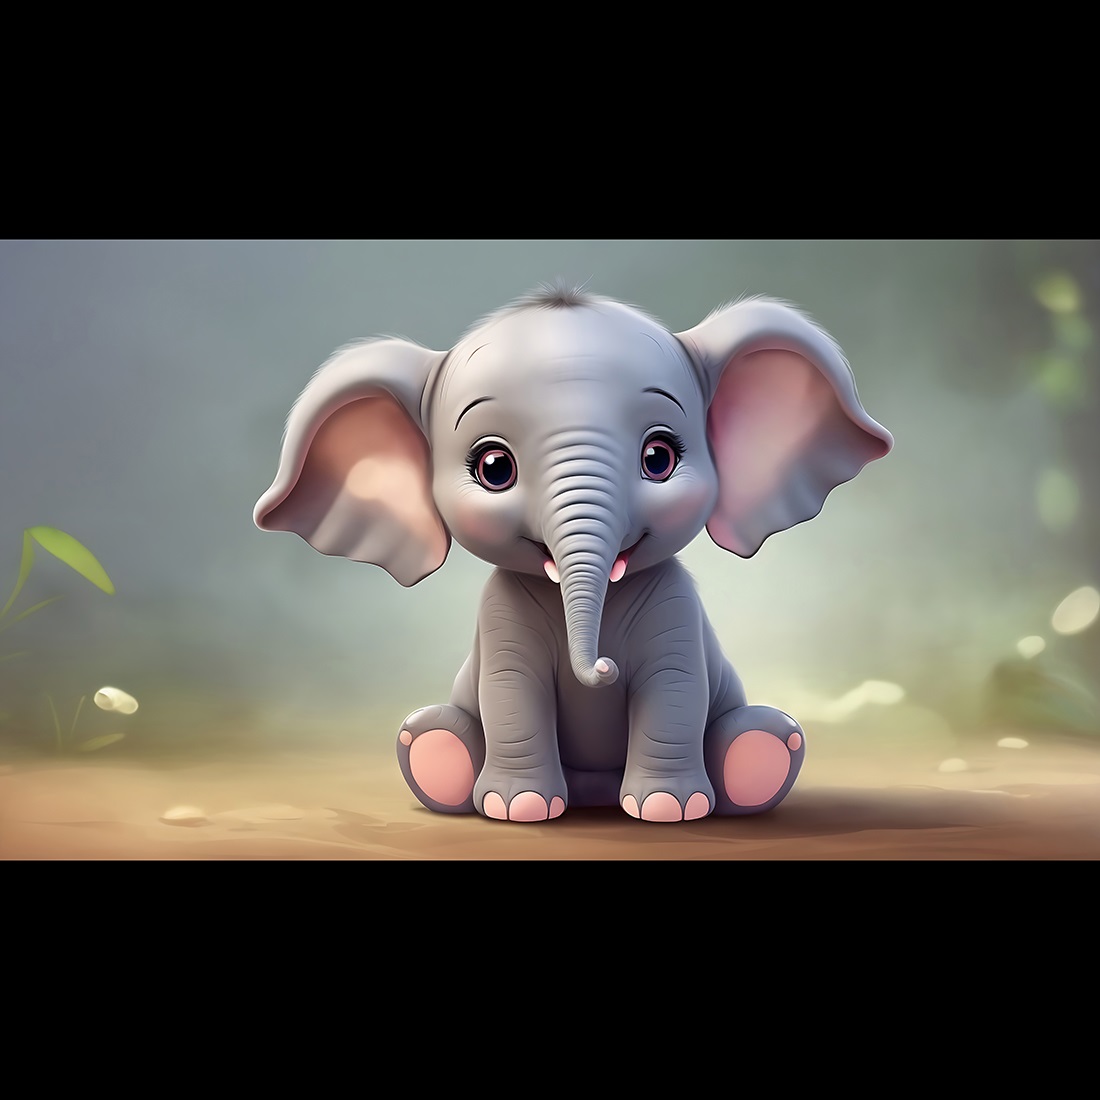 Adorable baby elephant sitting on the ground and staring at the camera ai generated cover image.